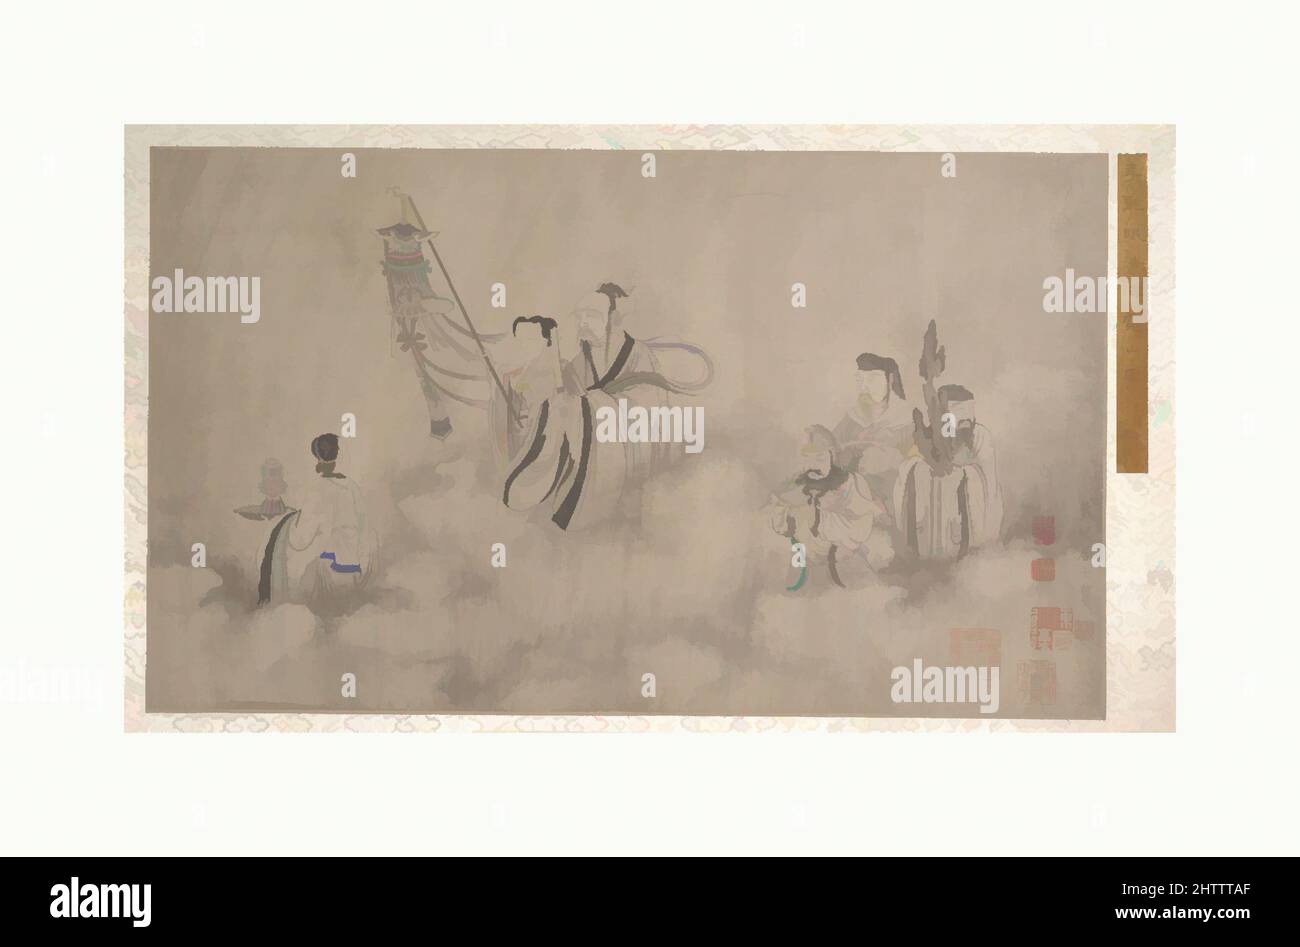 Art inspired by Procession of Arhats, Ming (1368–1644) or Qing (1644–1911) dynasty, China, Album of ten leaves; ink on silk, (a): 11 7/8 x 20 in. (30.2 x 50.8 cm); (b): 11 x 10 in. (27.9 x 25.4 cm); (c): 11 3/4 x 16 1/4 in. (29.8 x 41.3 cm); (d) 11 7/8 x 14 5/8 in. (30.2 x 37.1 cm); (e, Classic works modernized by Artotop with a splash of modernity. Shapes, color and value, eye-catching visual impact on art. Emotions through freedom of artworks in a contemporary way. A timeless message pursuing a wildly creative new direction. Artists turning to the digital medium and creating the Artotop NFT Stock Photo